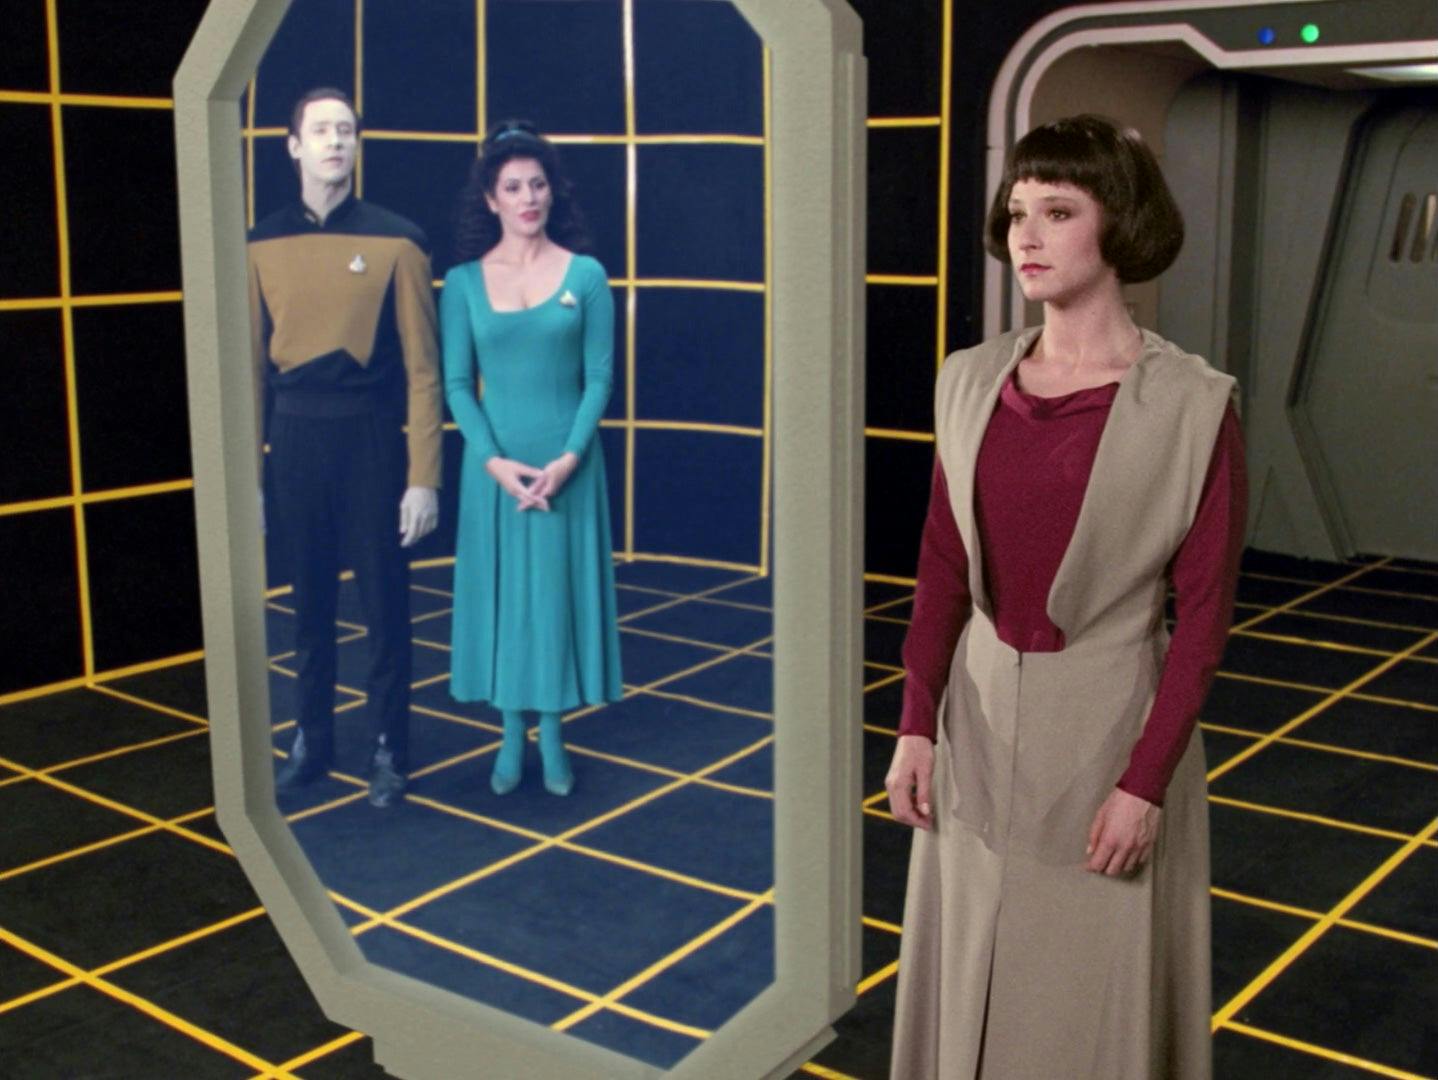 Lal stands in front of a screen, looking at her appearance. Data and Troi can be seen through the screen watching her as she adjusts her appearance.